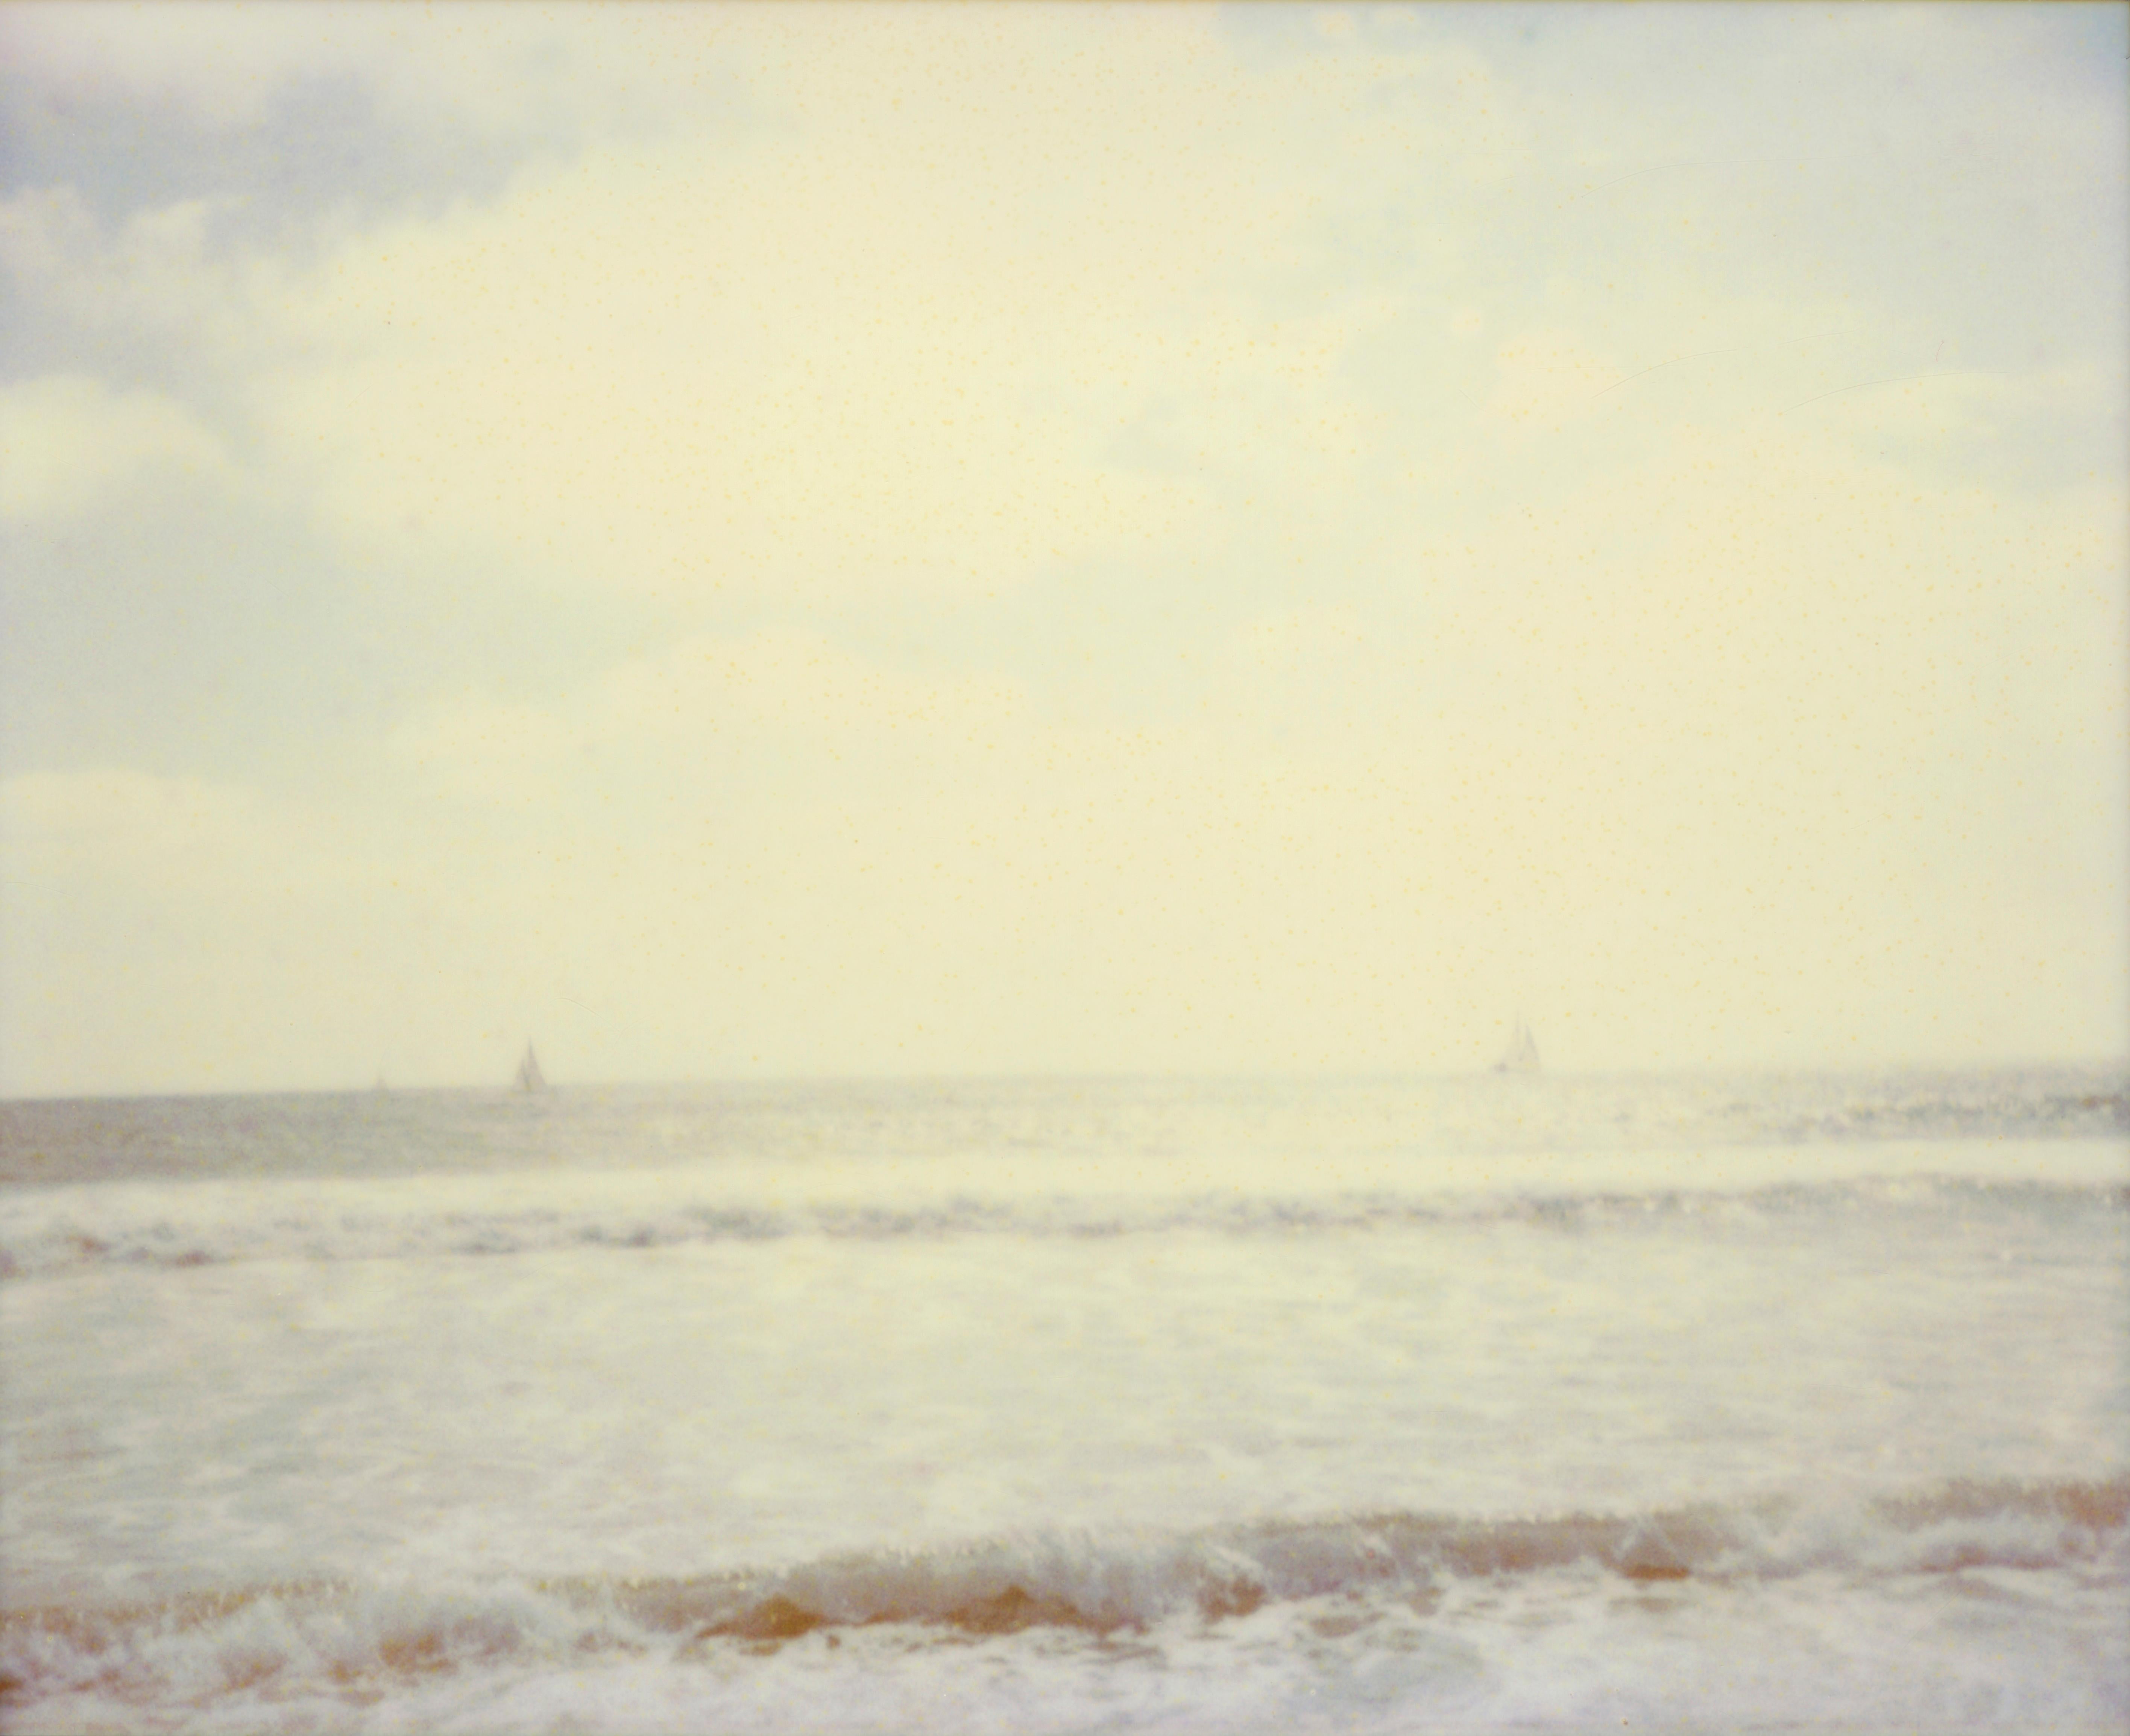 Stefanie Schneider Color Photograph - The Ocean (The Princess and her Lover), analog, mounted